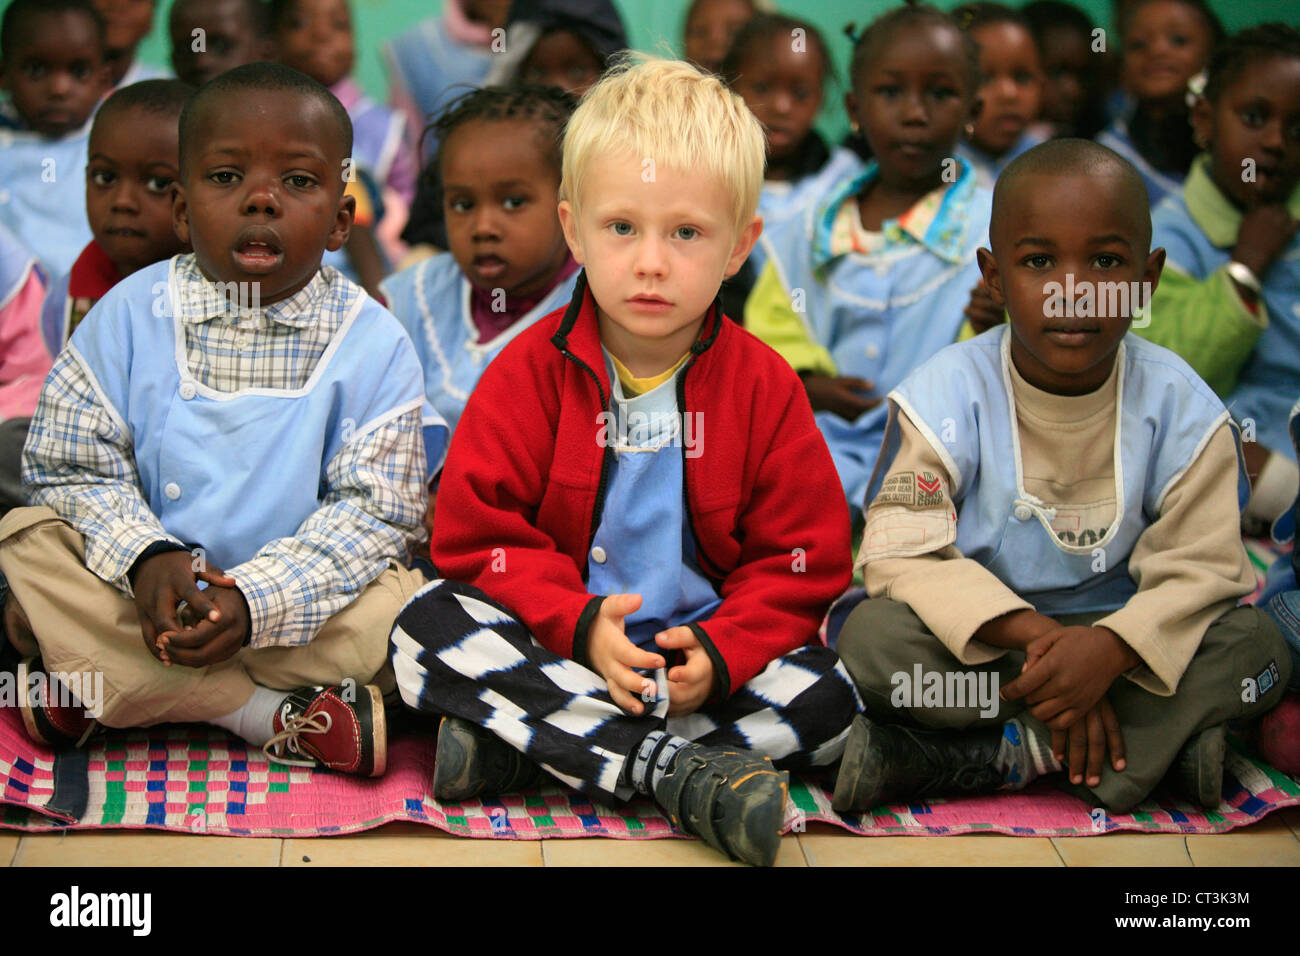 AN AFRICAN CHILD Stock Photo